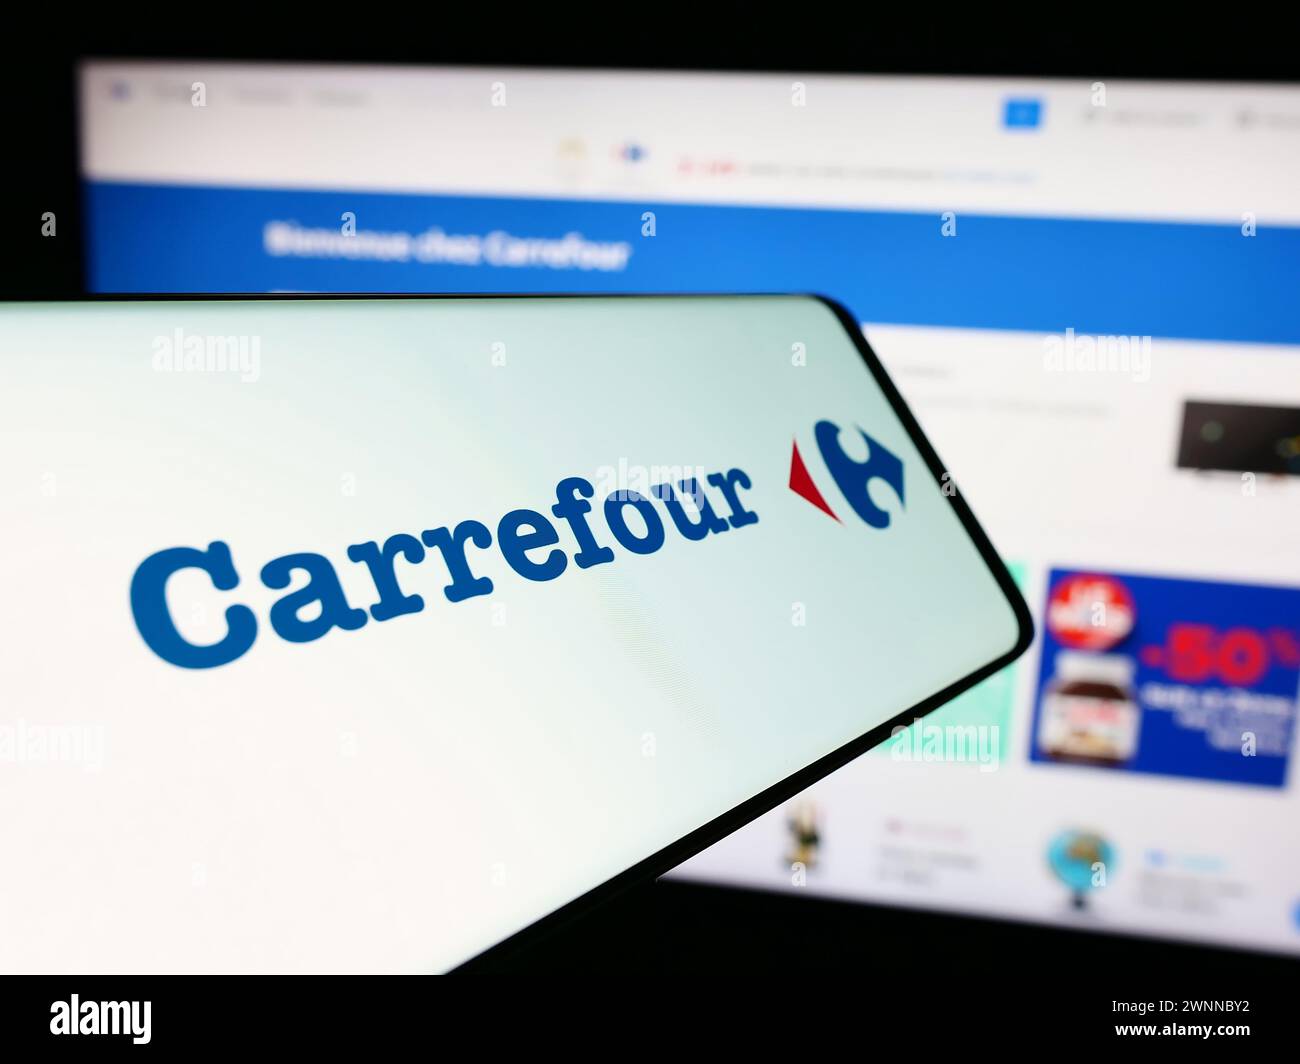 Smartphone with logo of French retail company Carrefour S.A. in front of business website. Focus on center-right of phone display. Stock Photo